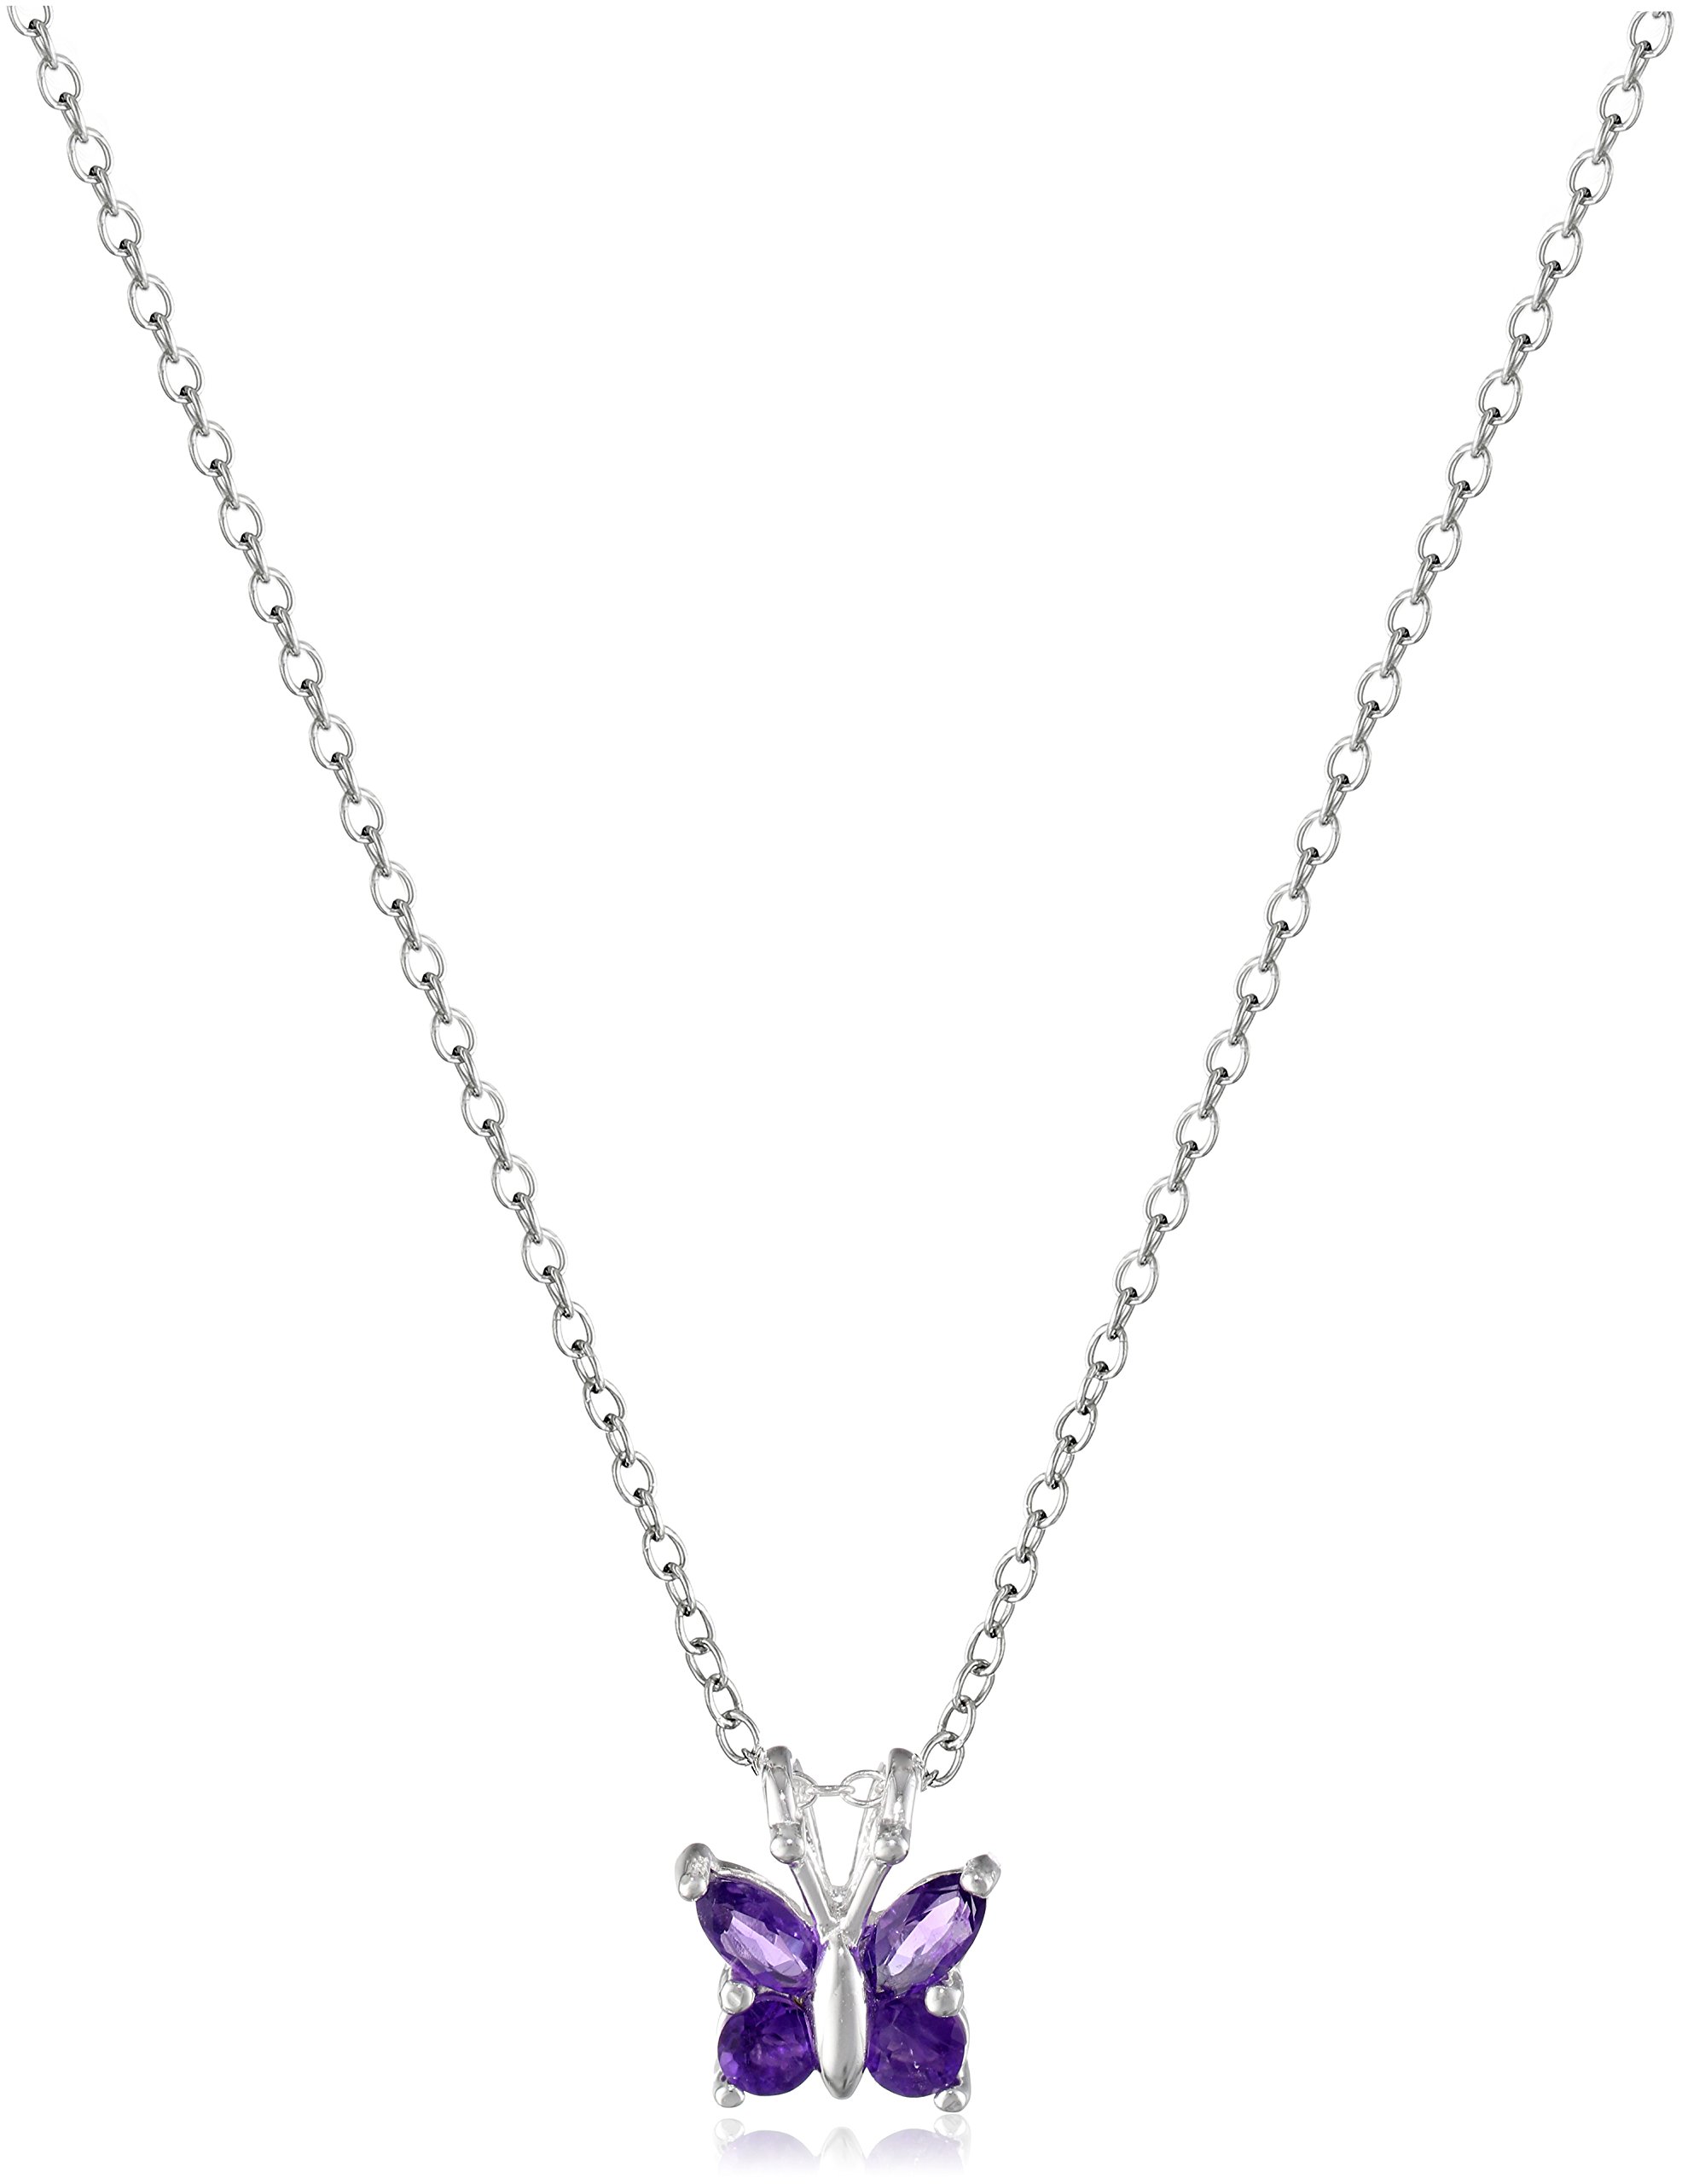 Amazon Collection Sterling Silver Gemstone Butterfly Pendant Necklace, 18